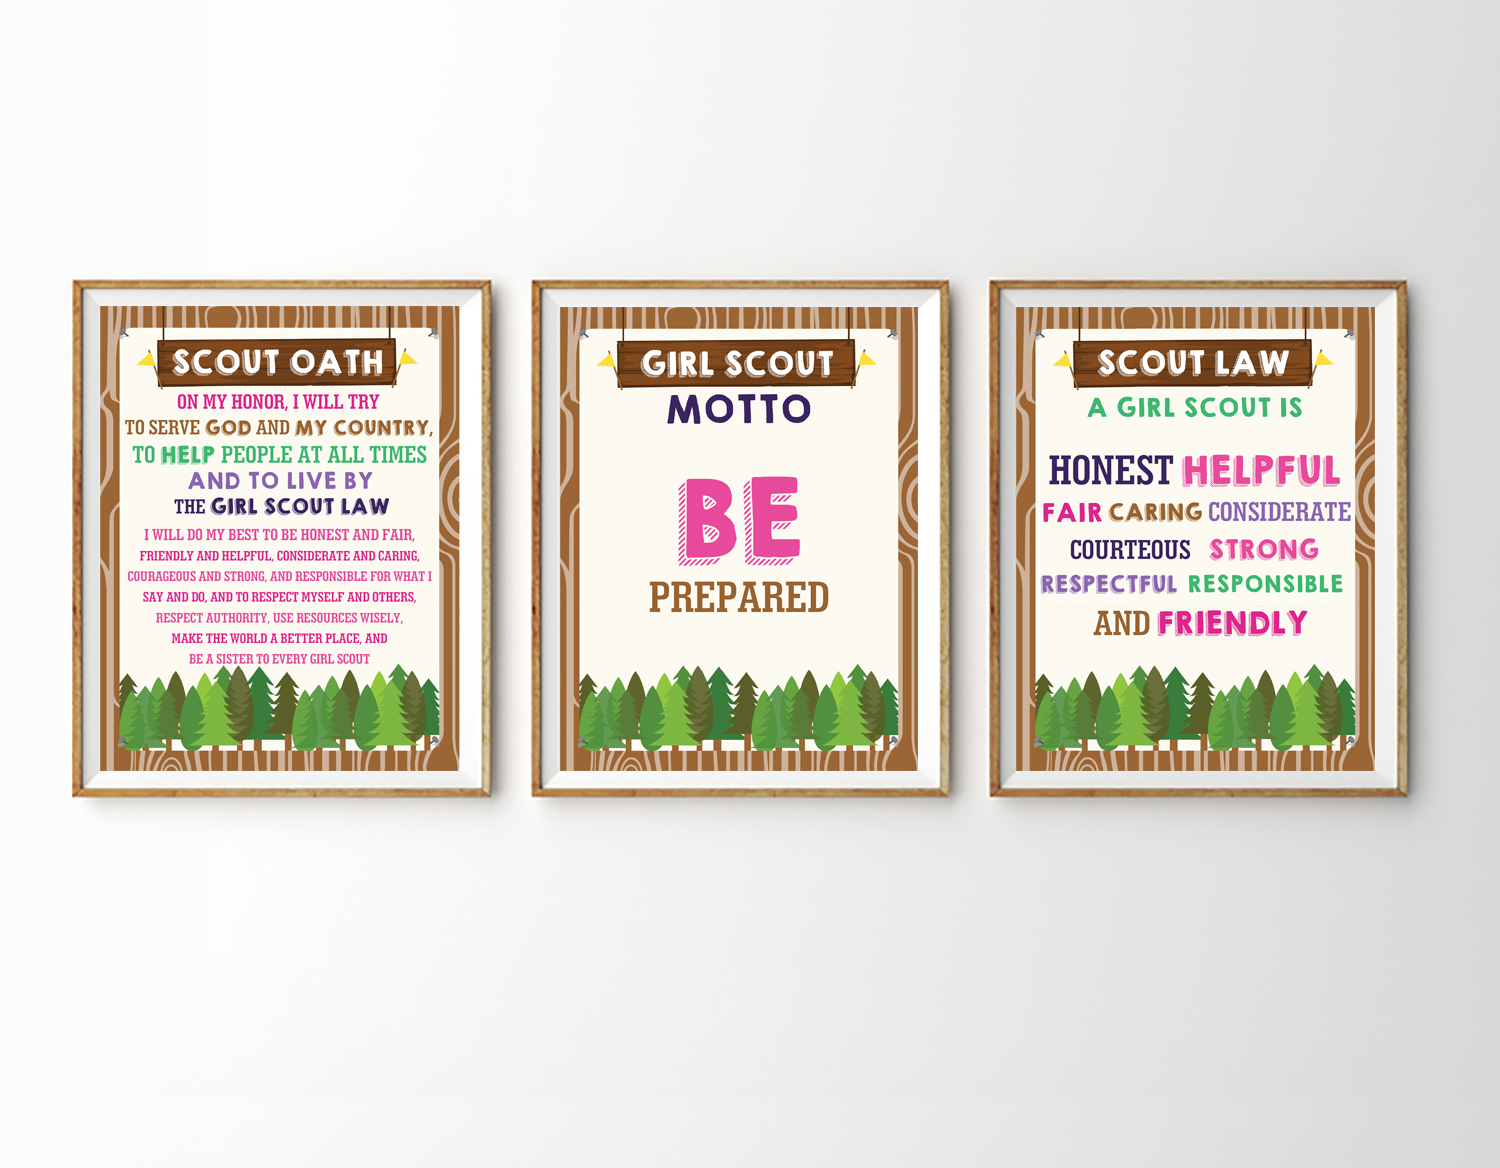 Instant Download - Girl Scout Motto, Oath and Law Posters. #girlscouts